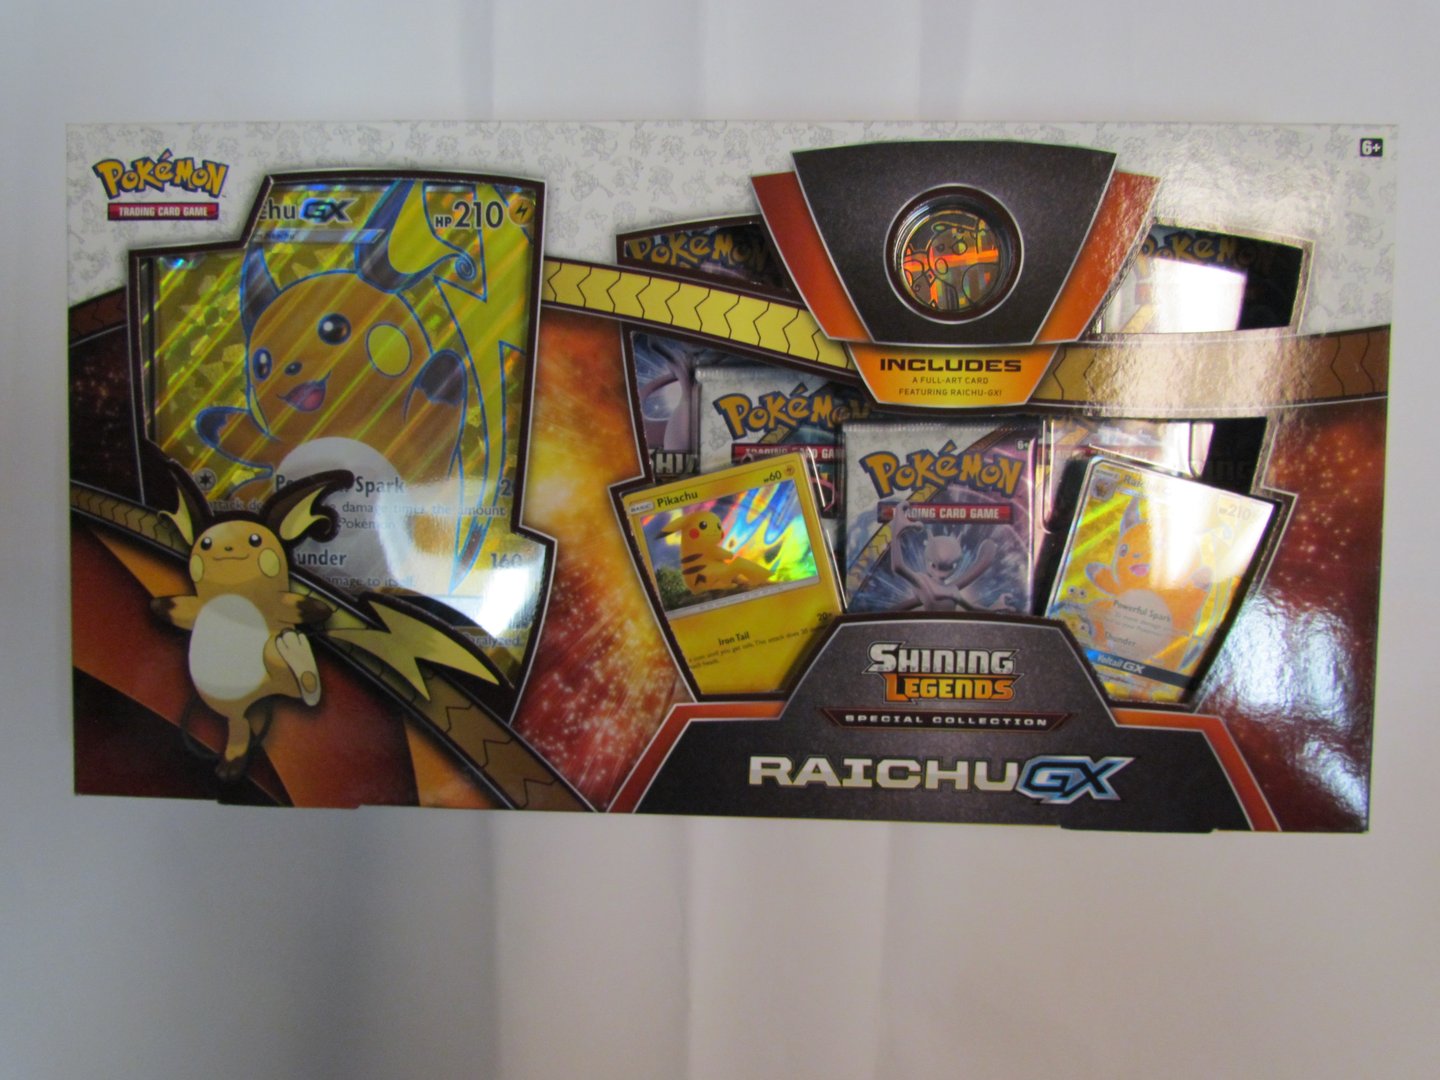 ✅ Pokemon Shining Legends Special Collection Raichu GX Box NEW SEALED ✅ IN HAND 